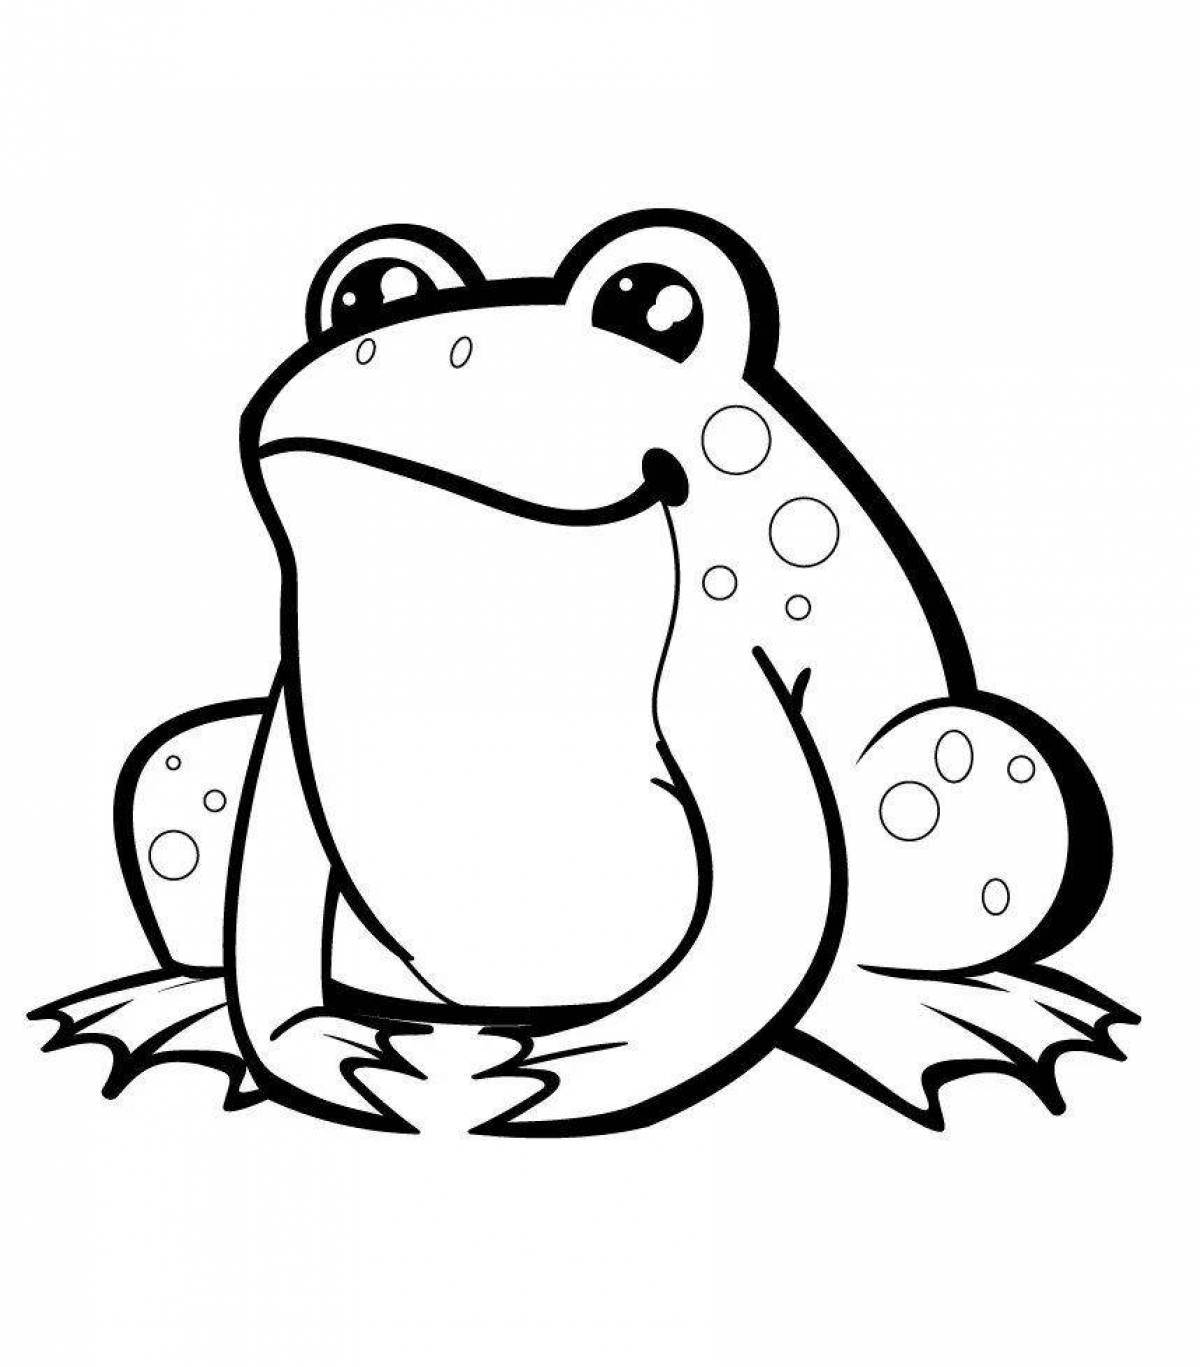 Bright frog pattern coloring page